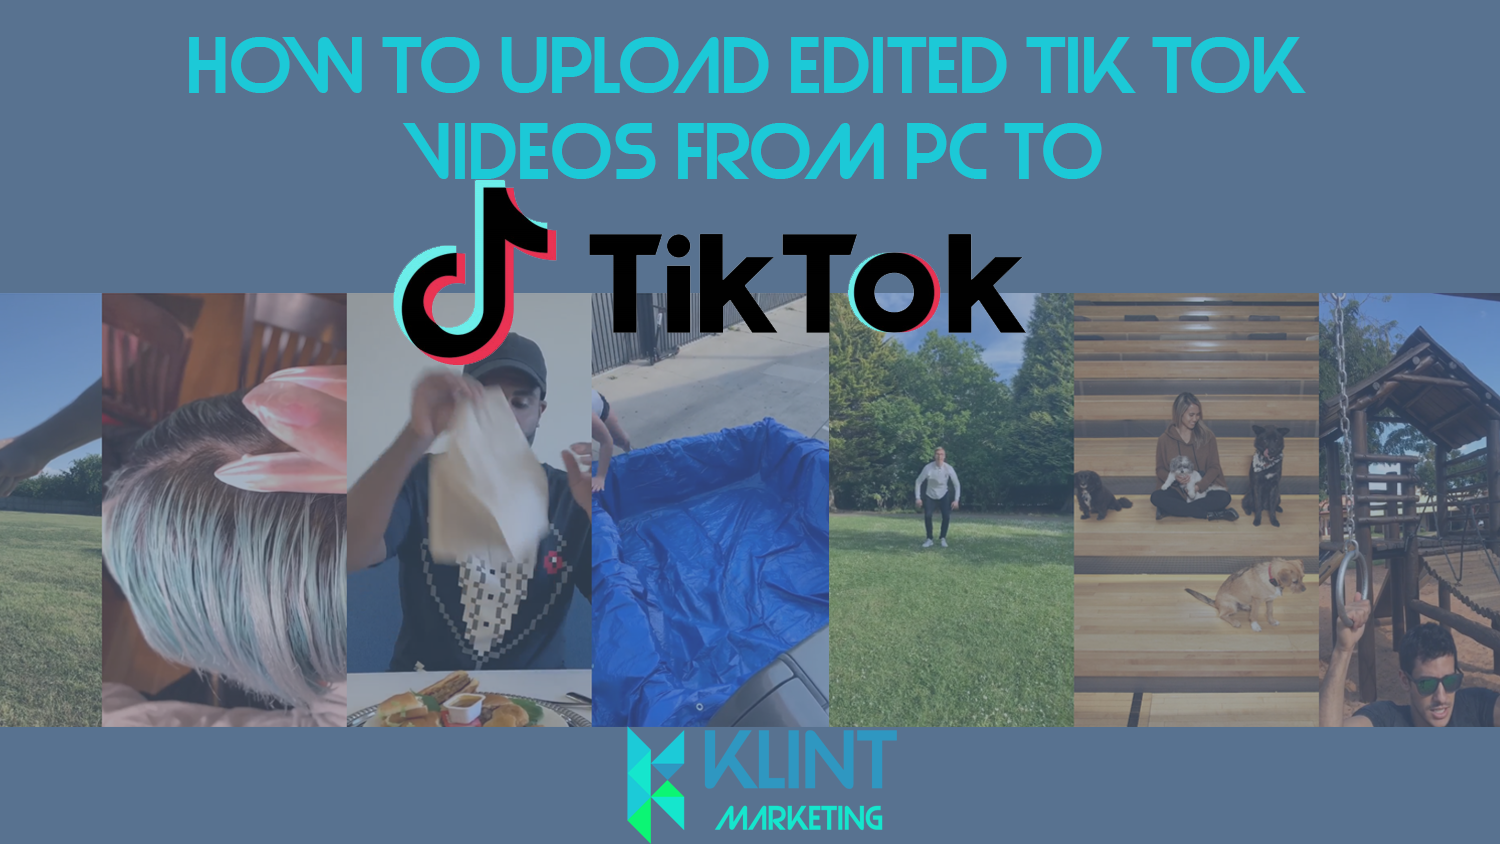 How To Upload Edited Tik Tok Videos From Pc To Tik Tok 2020 Klint Marketing The Best Growth Hacking Agency In Copenhagen - tik tok hit or miss roblox music codes songs ids 2019